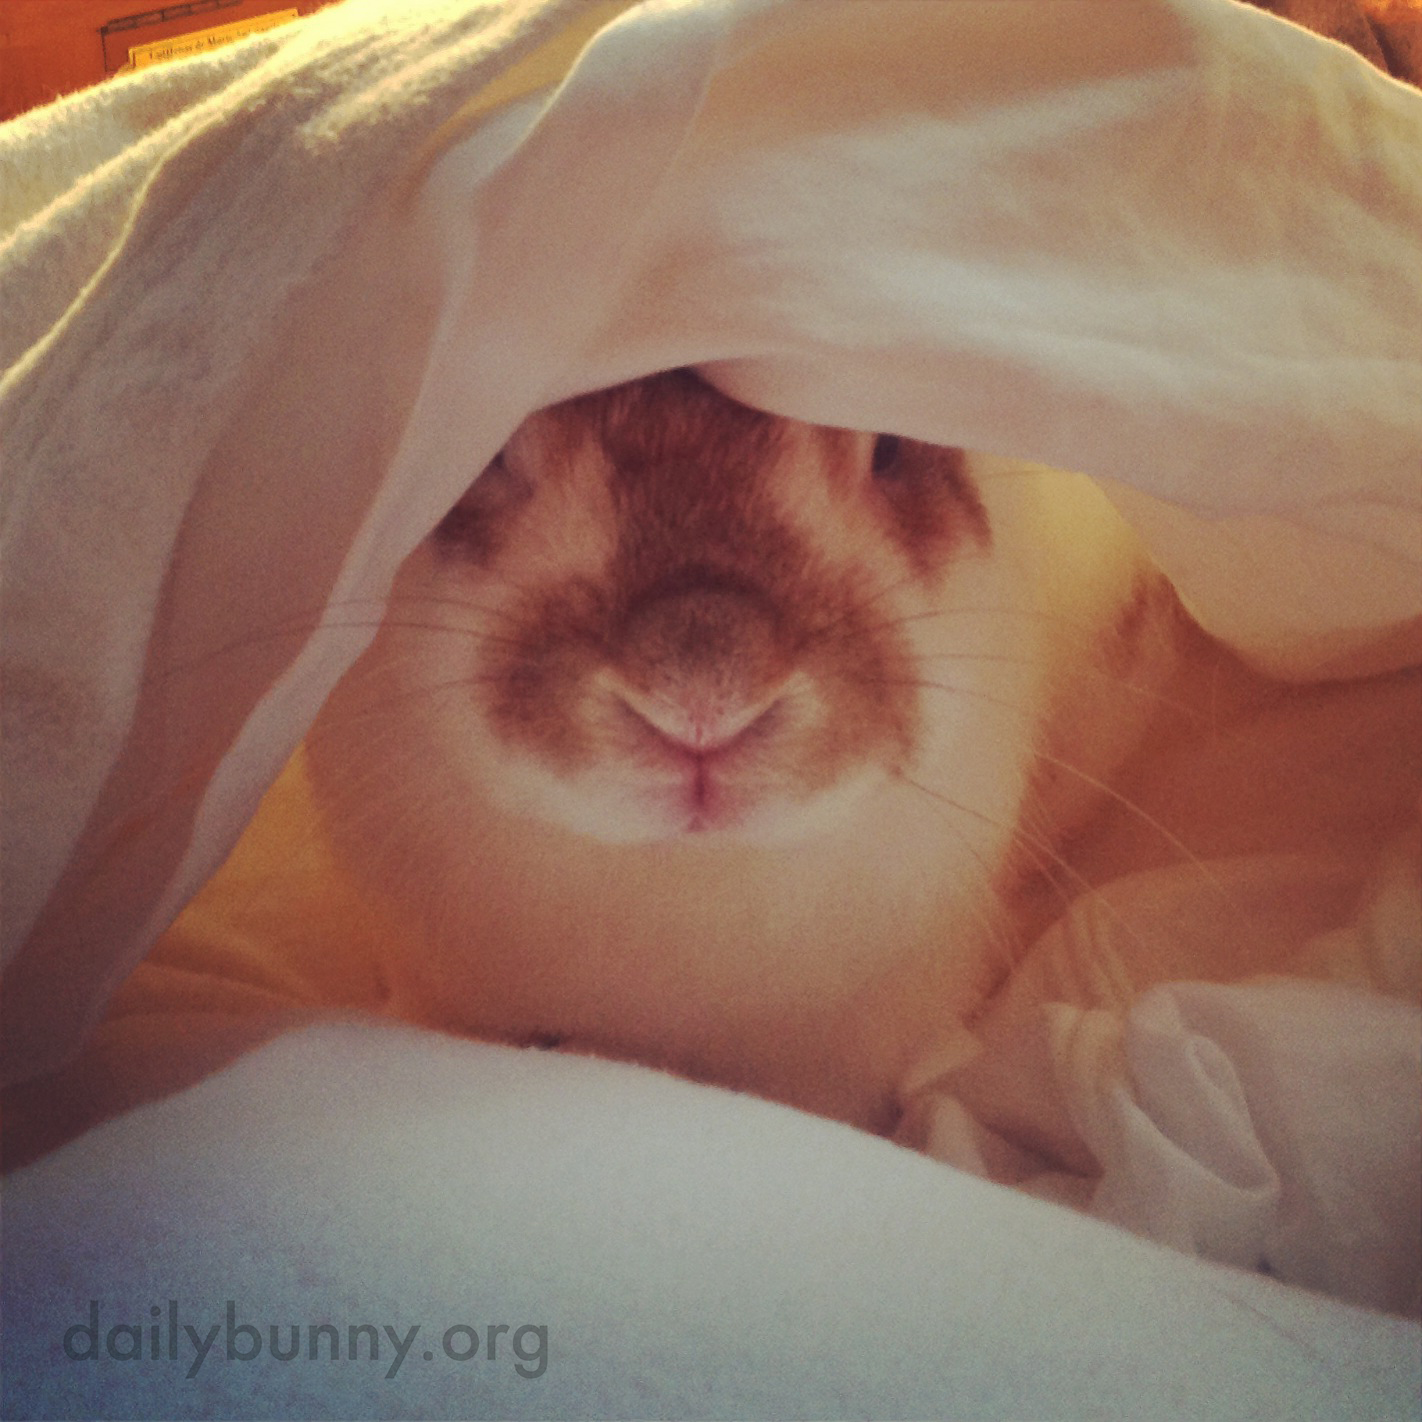 Surprise! Bunny's Hiding Under the Covers!